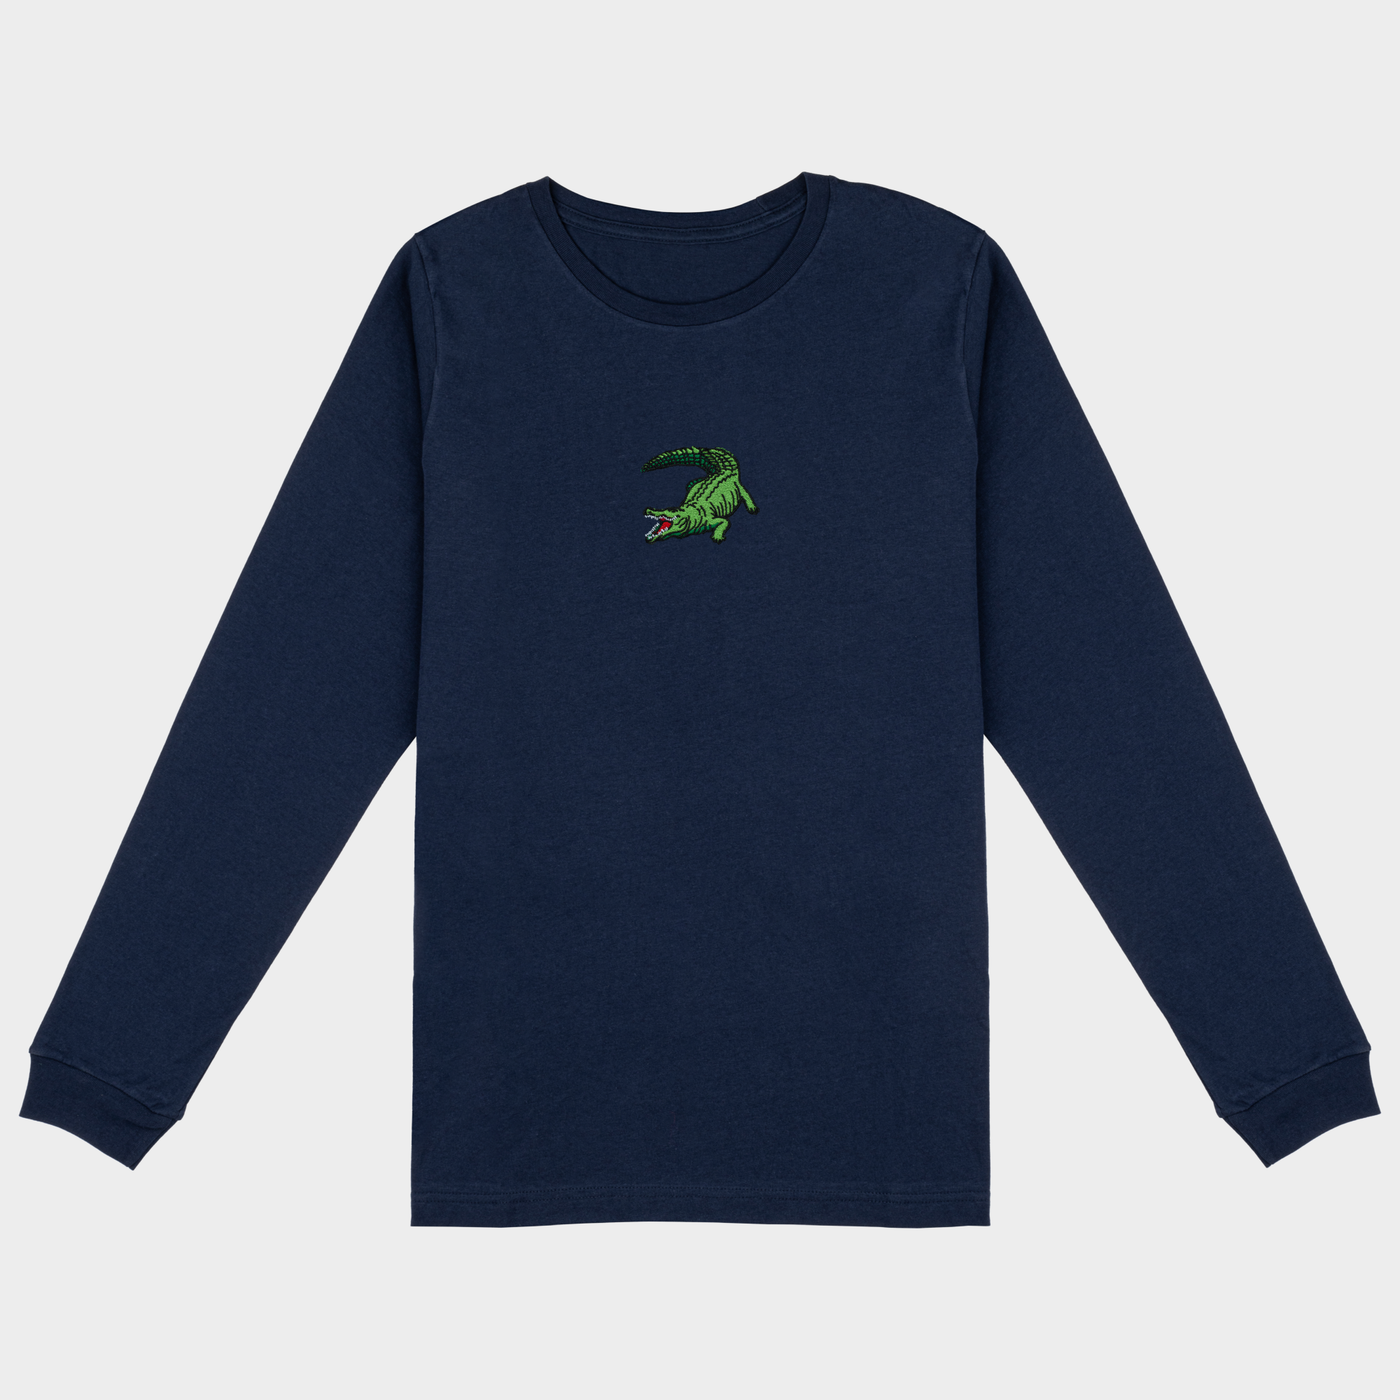 Bobby's Planet Women's Embroidered Saltwater Crocodile Long Sleeve Shirt from Australia Down Under Animals Collection in Navy Color#color_navy